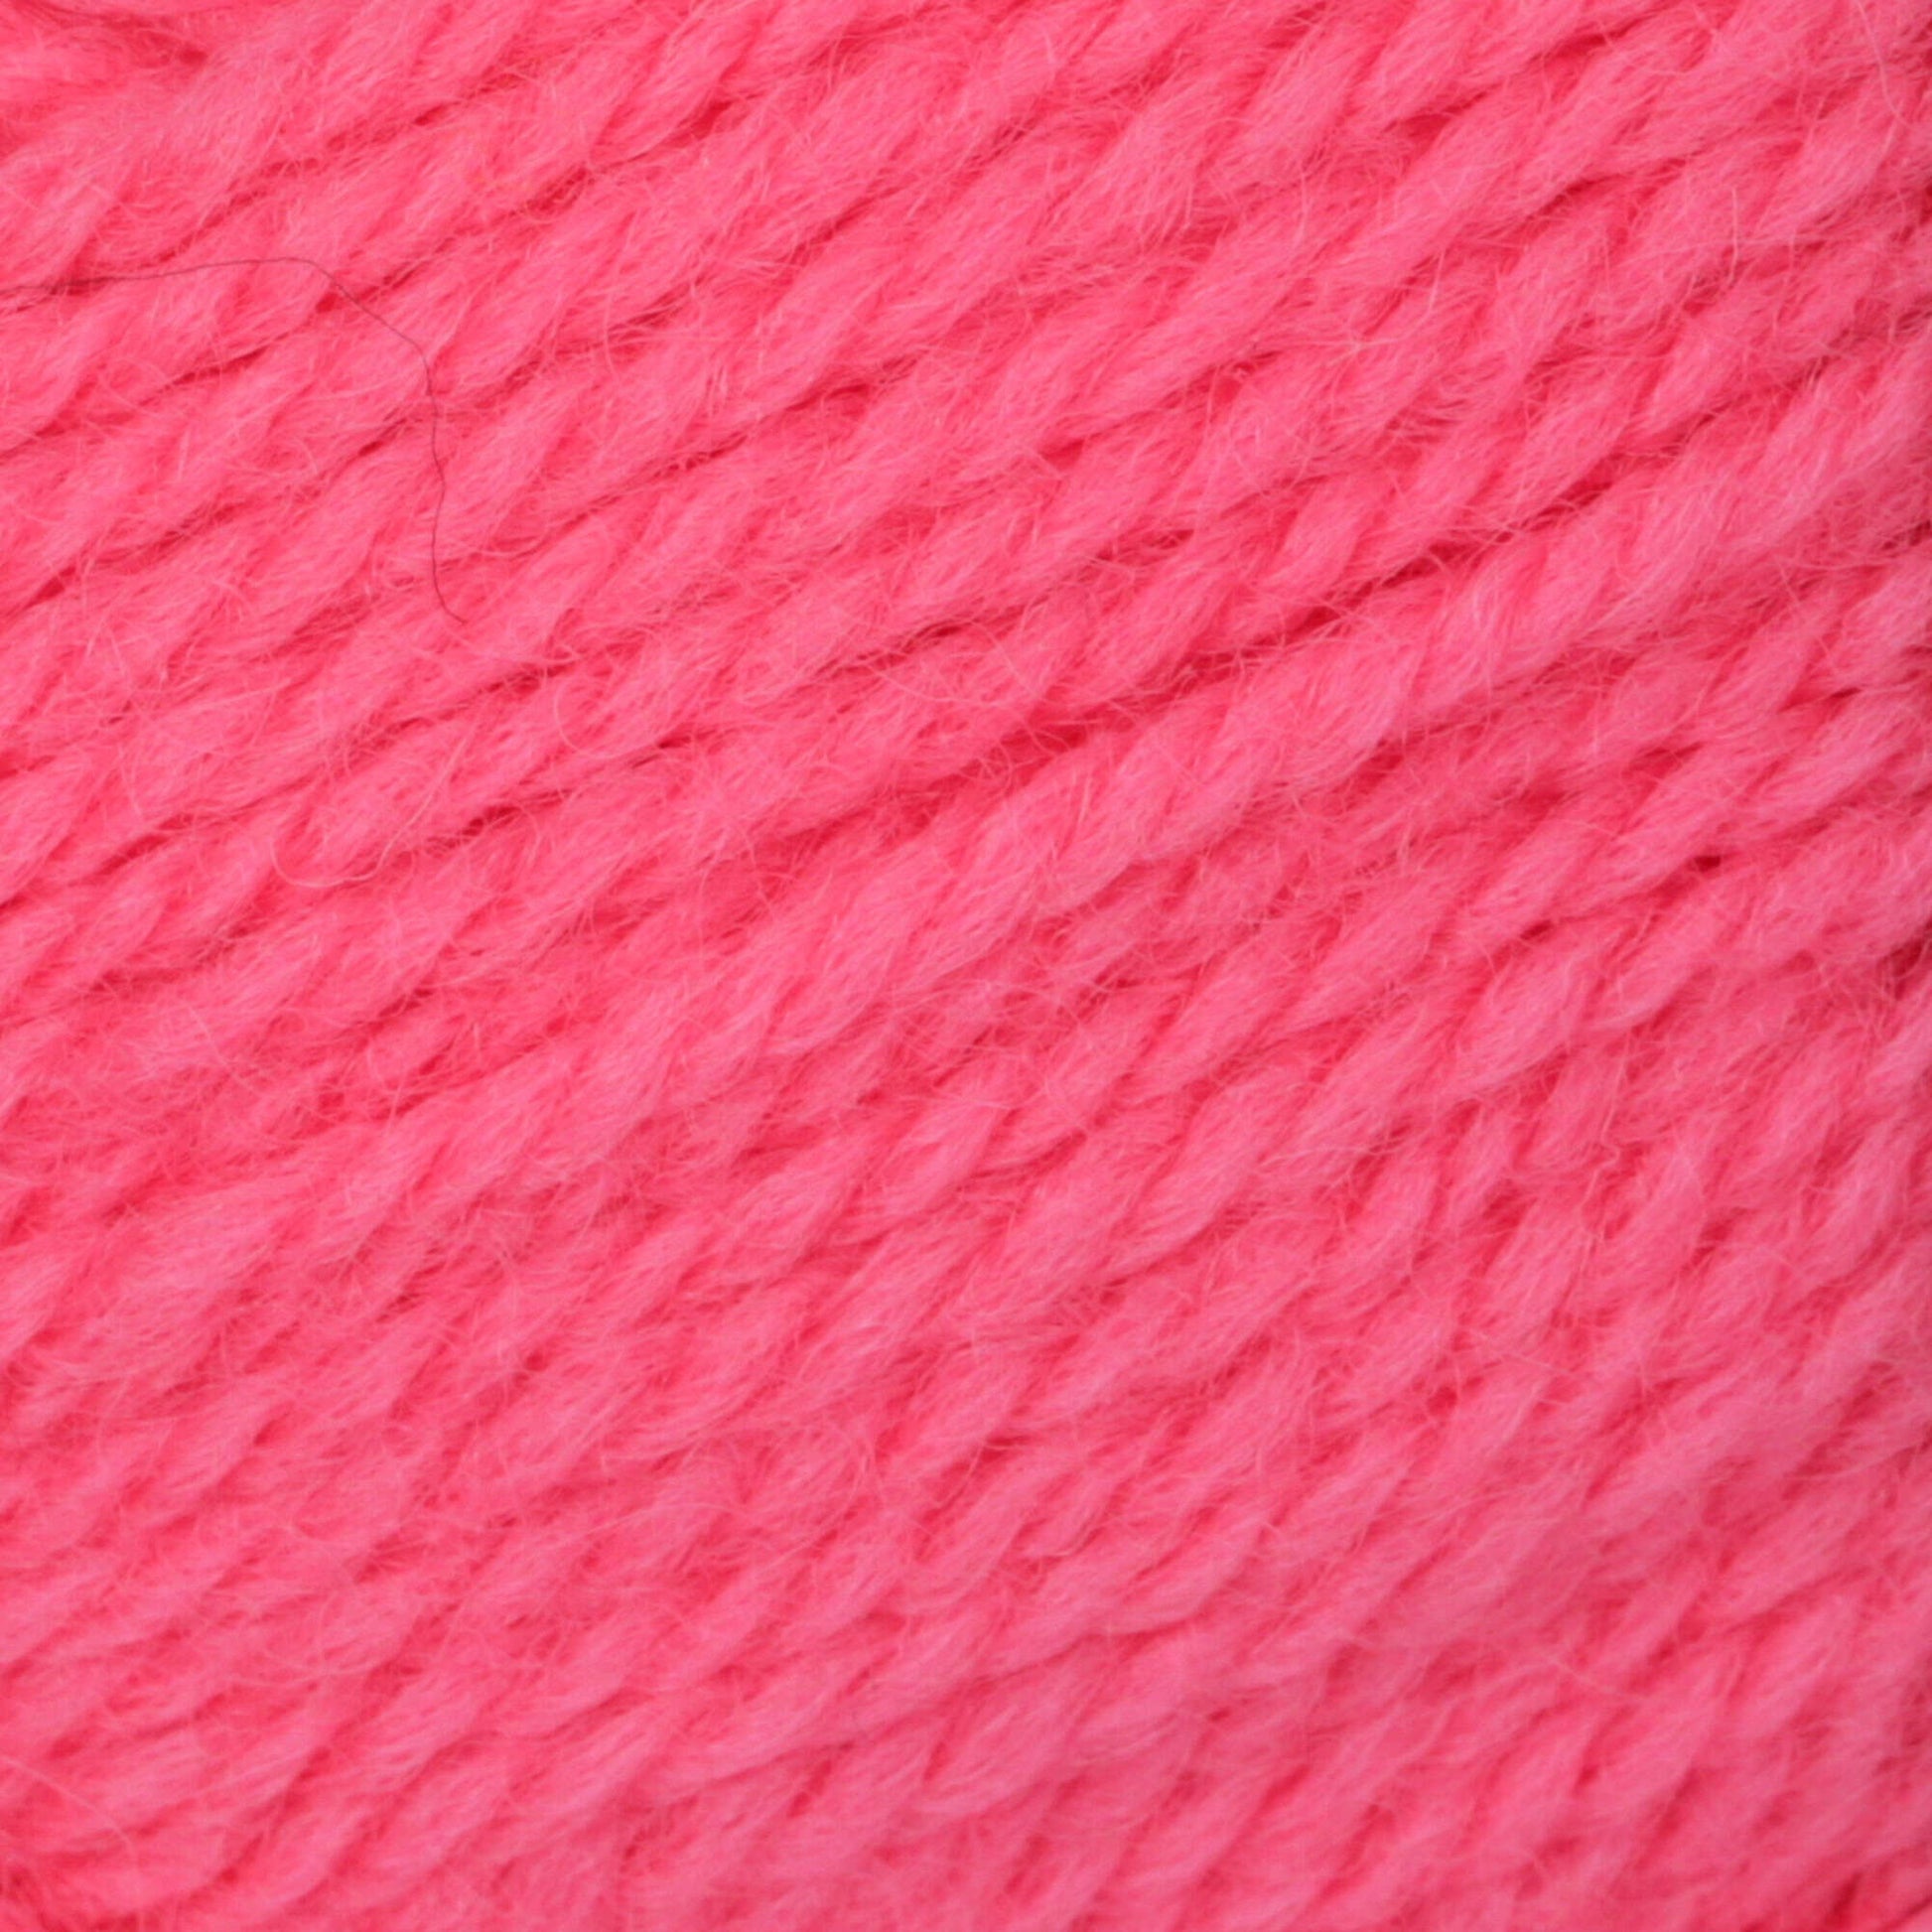 Patons Classic Wool Worsted Yarn - Discontinued Shades Camelia Rose